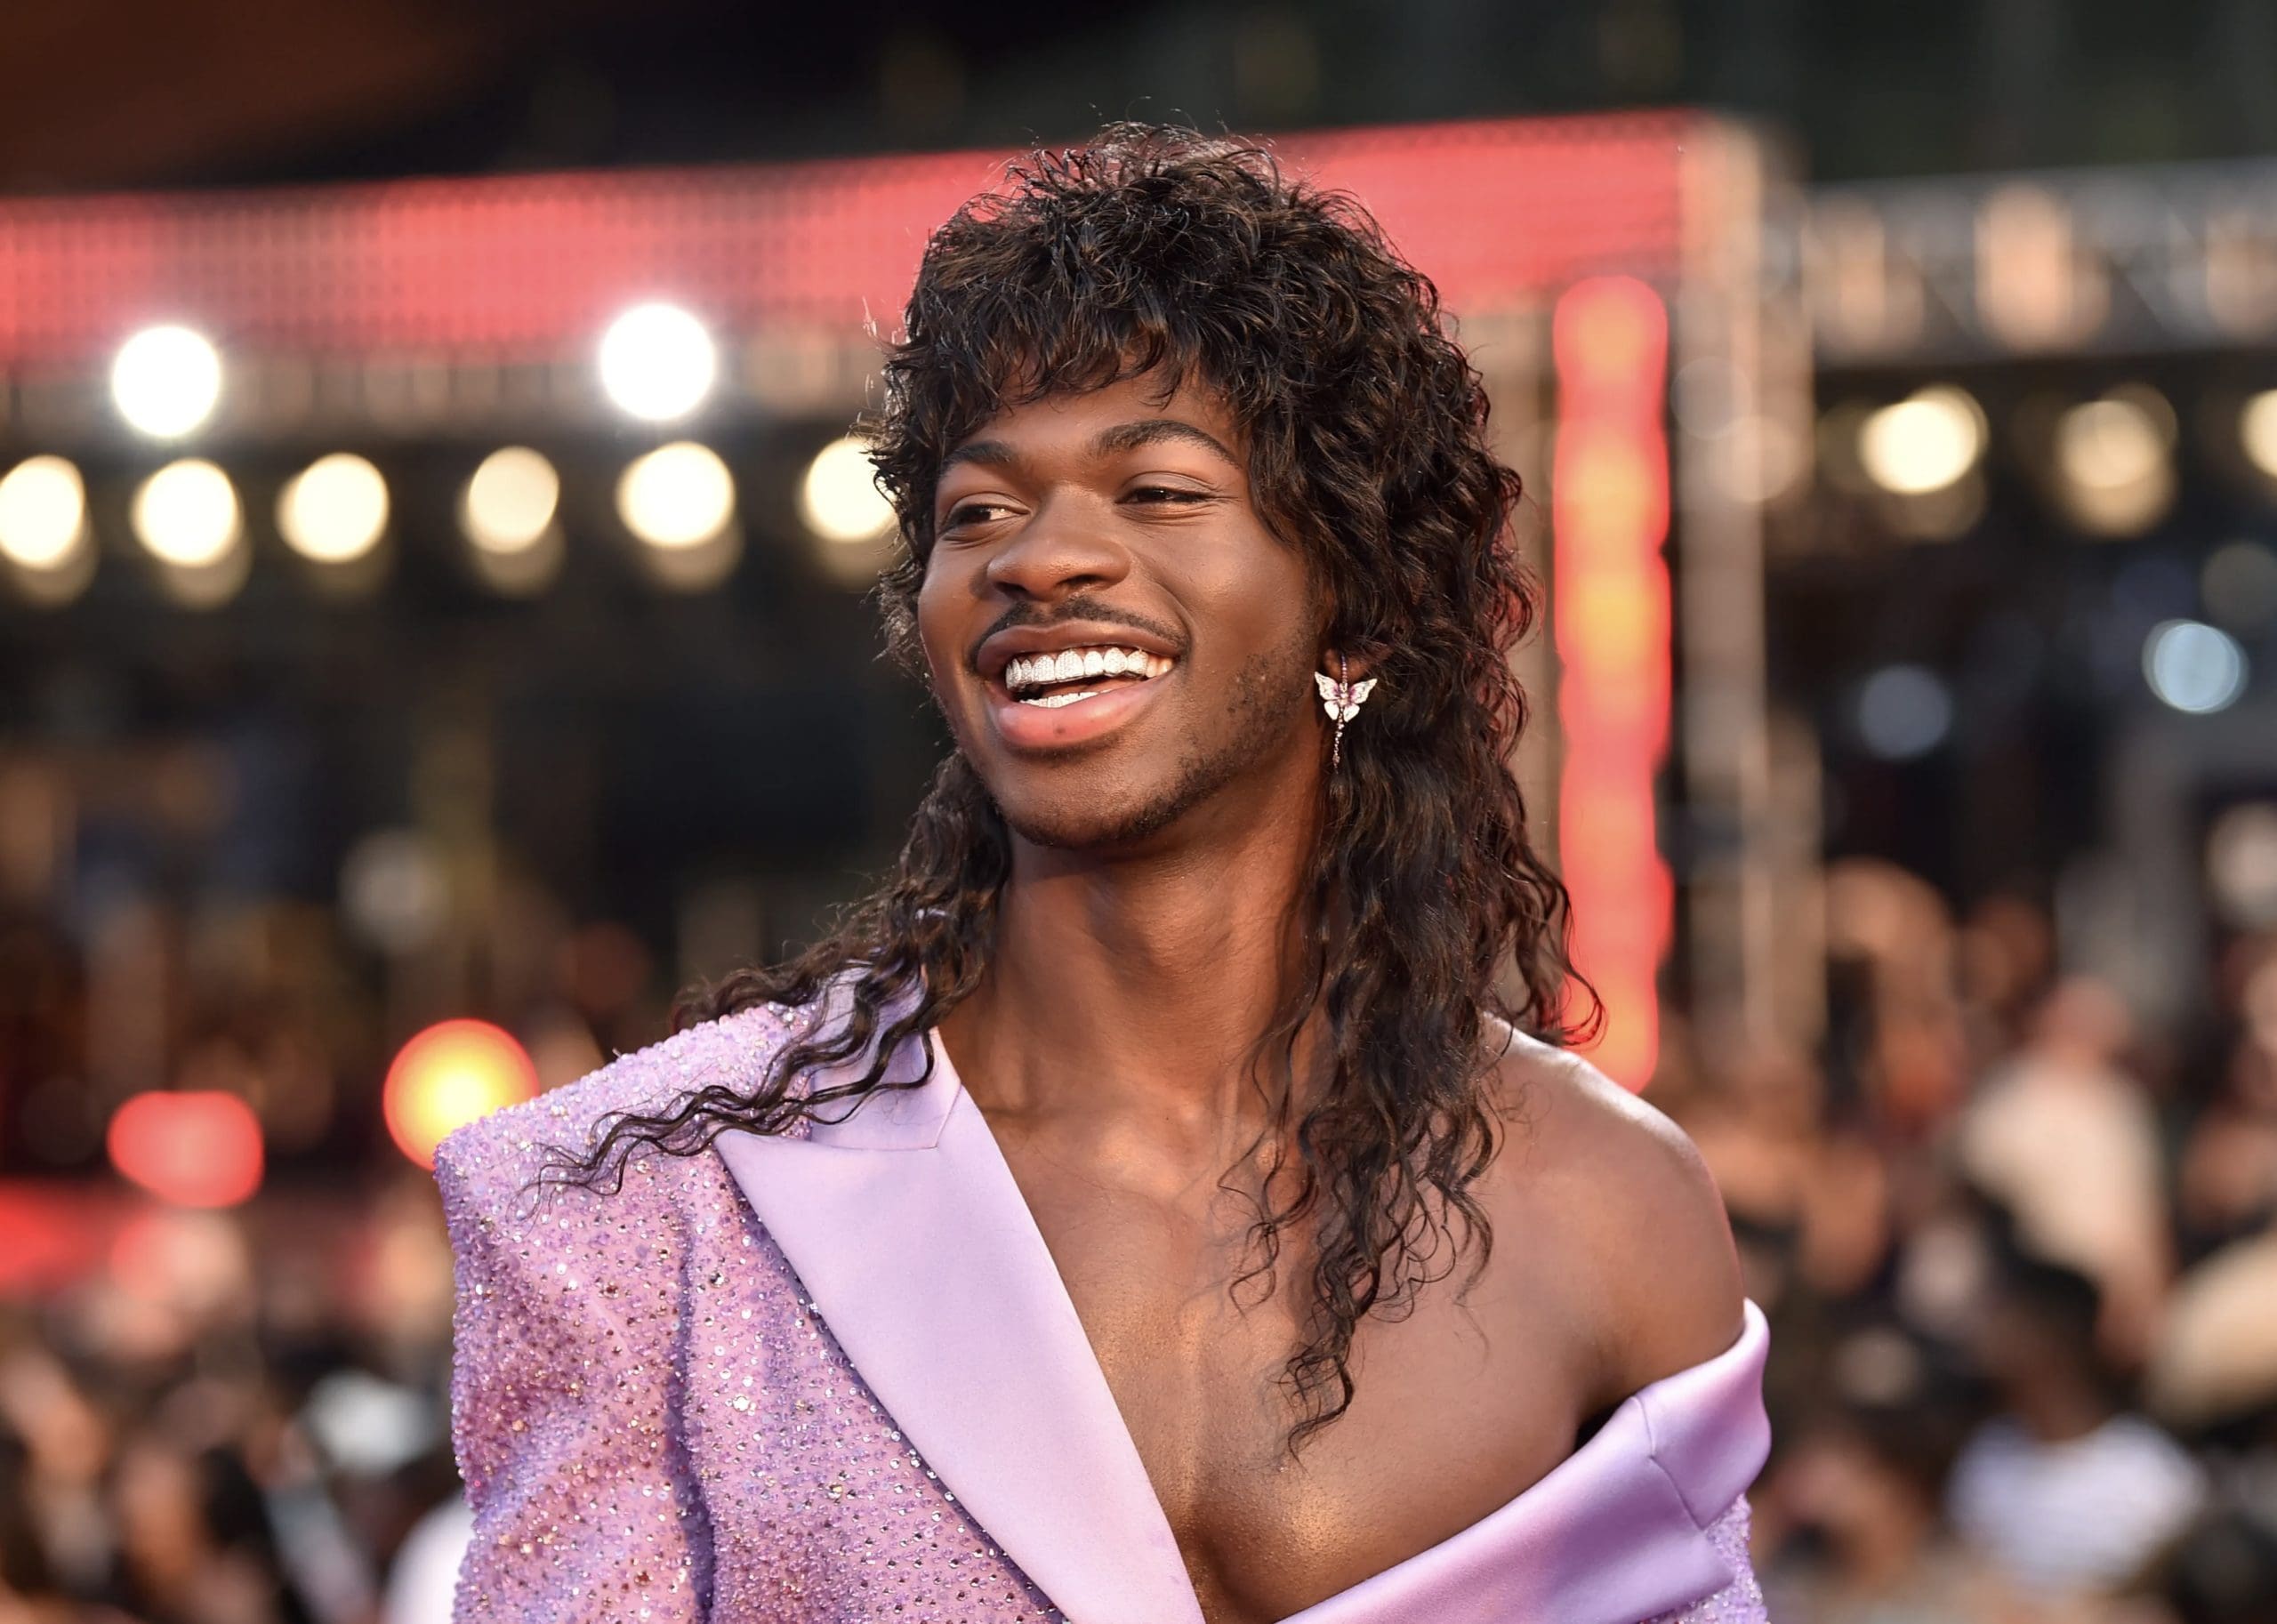 A Twitter Troll Accused Lil Nas X Of Being ‘Not Really Gay’ And The Rapper Fired Back With A Perfect Response